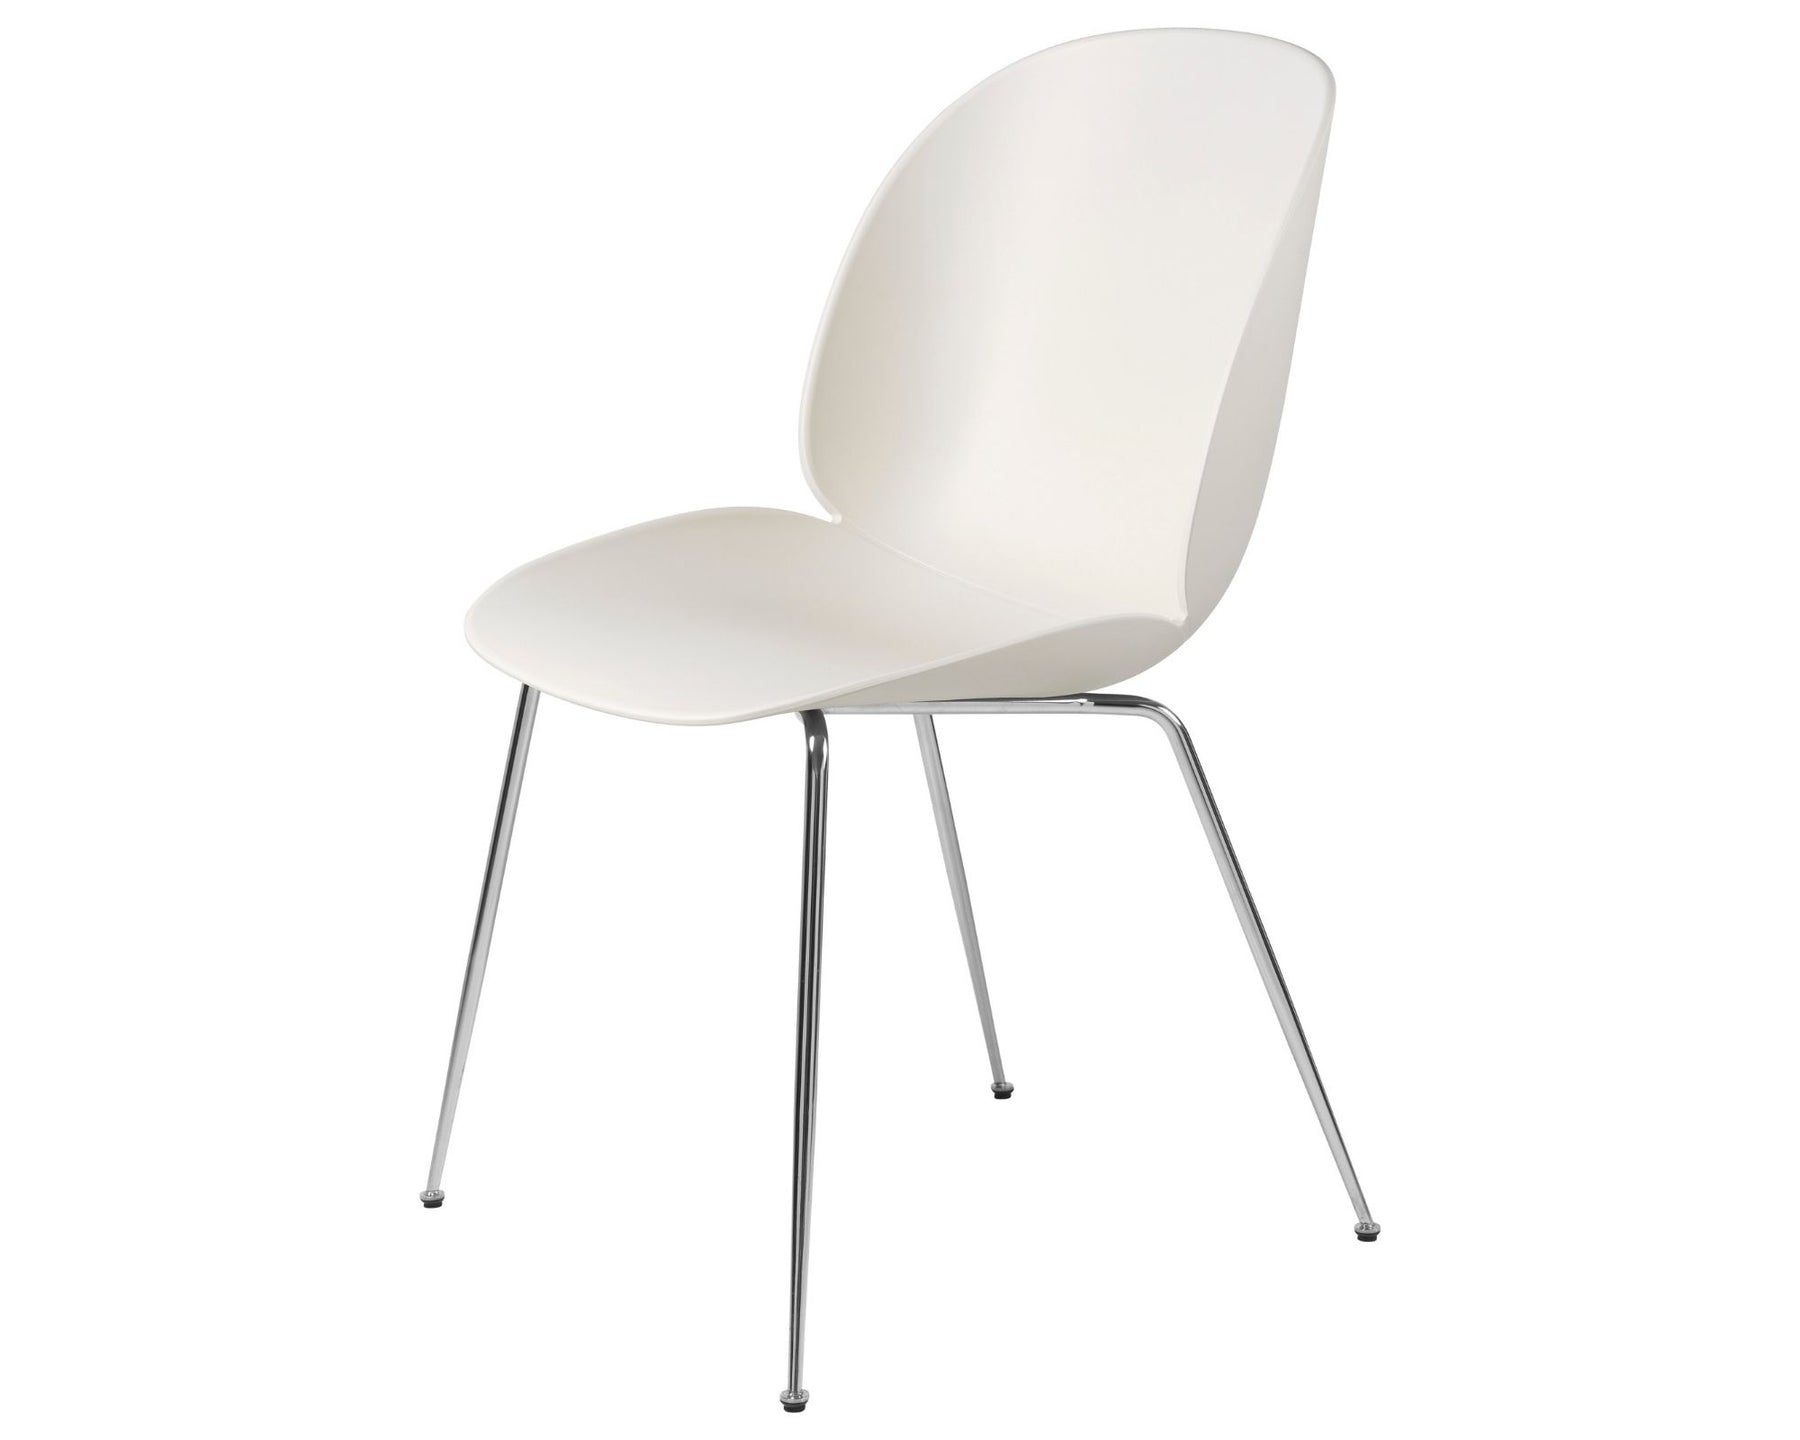 Alabaster White Dining Chair with Chrome Base | DSHOP